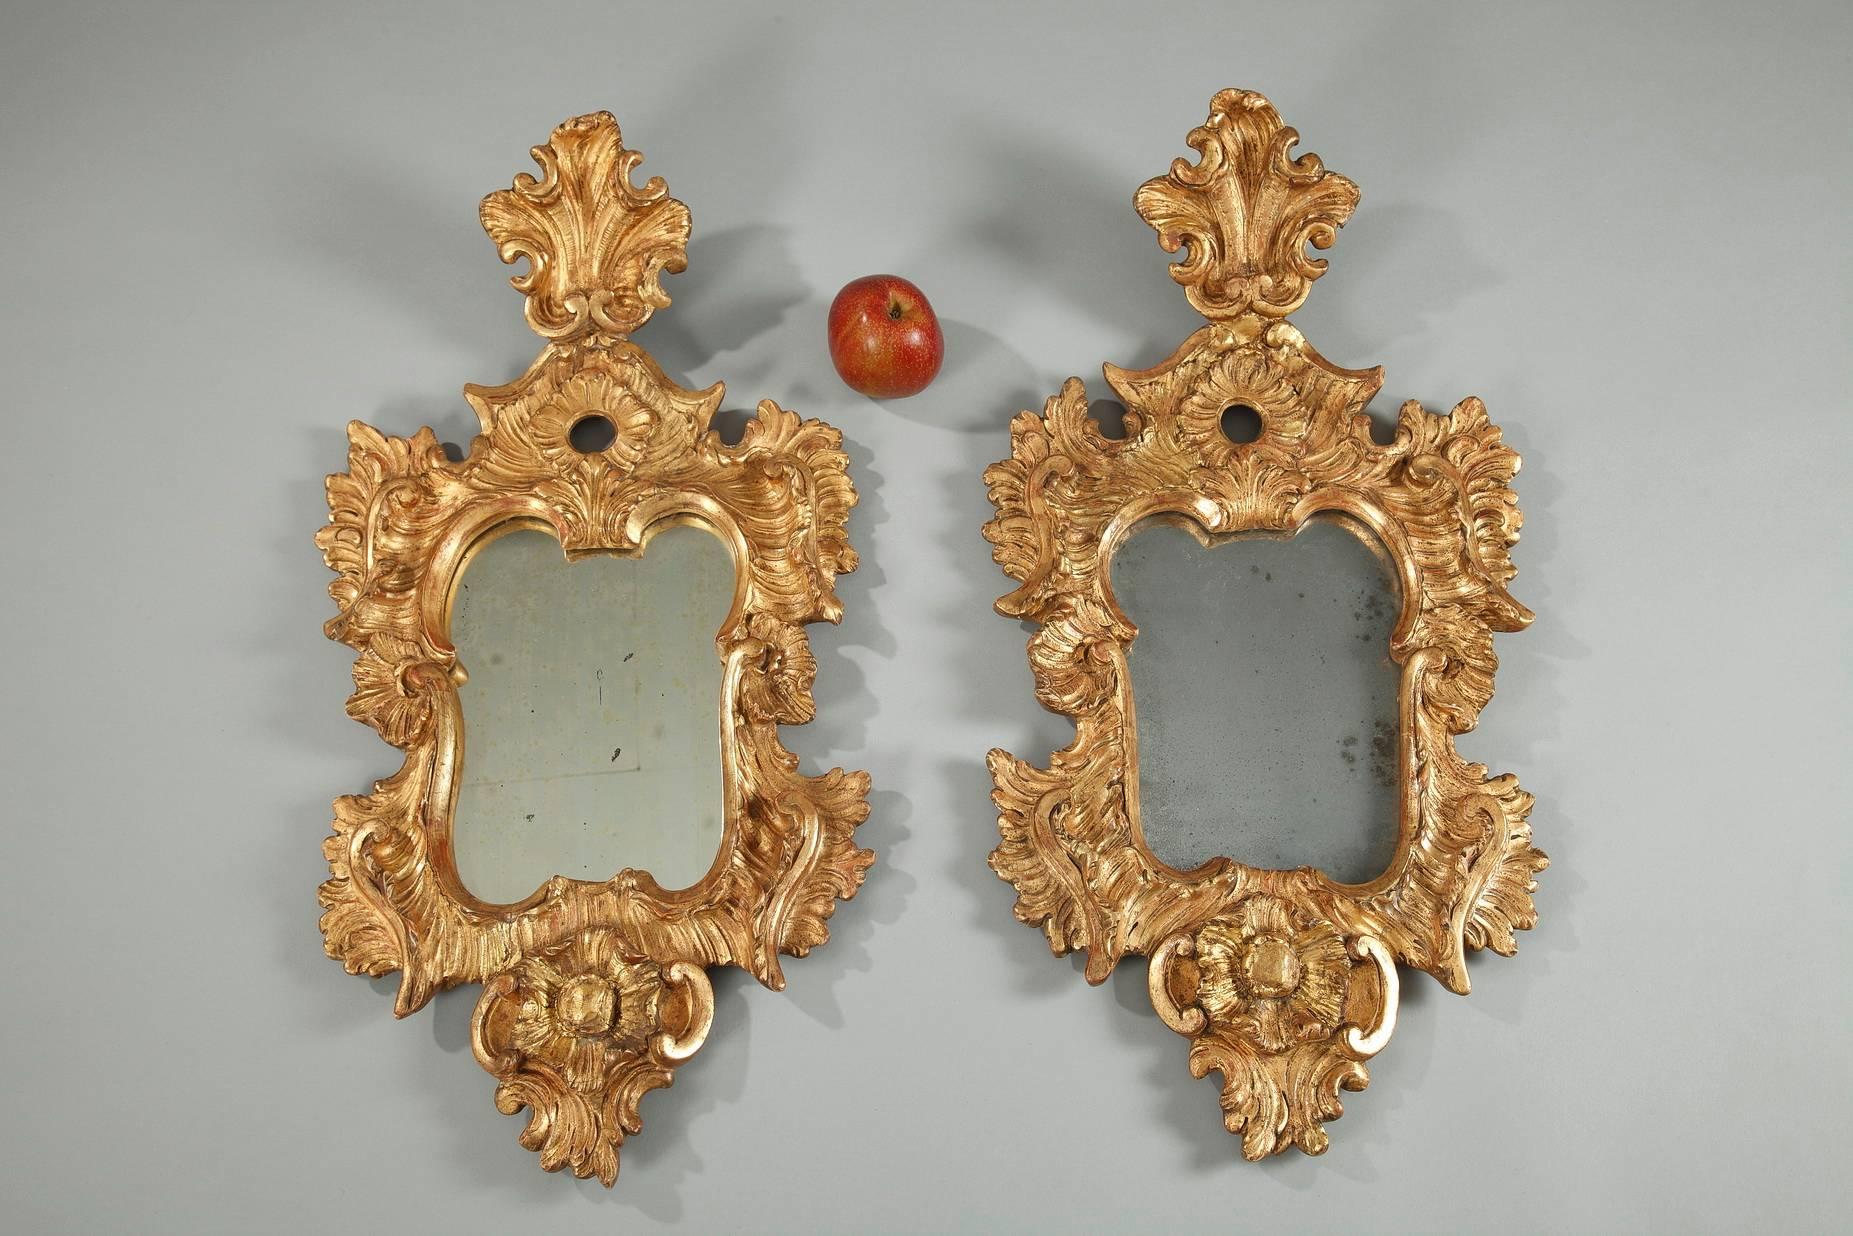 Early 18th century pair of Venetian wall mirrors. Each of them features an intricately carved giltwood frame crafted in the opulent Rococo style, with its foliate decoration of acanthus leaves, sweeping scrolls and shells. These small wooden mirrors